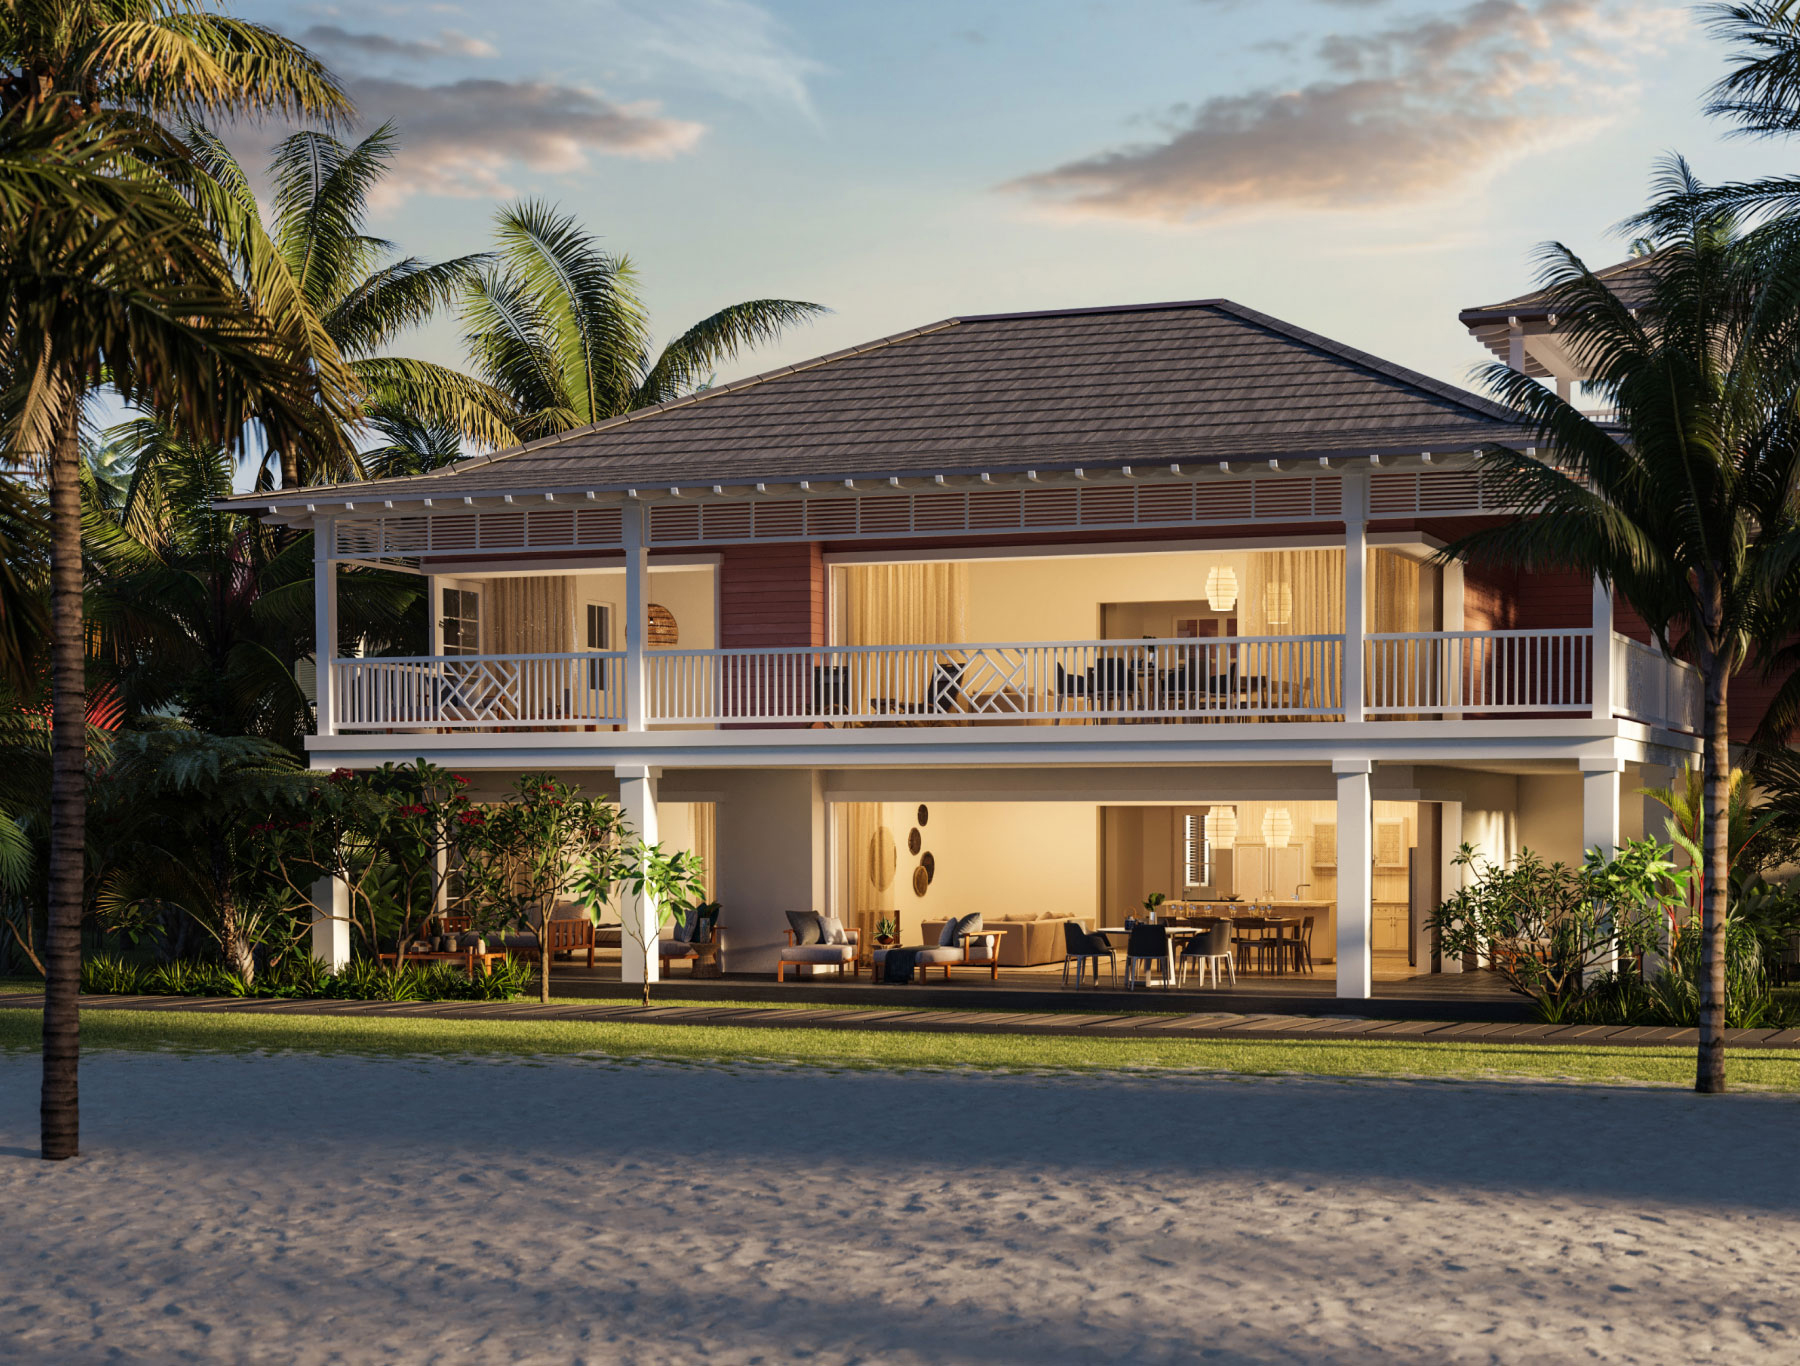 Elegant home at The Abaco Club, reflecting club lifestyle